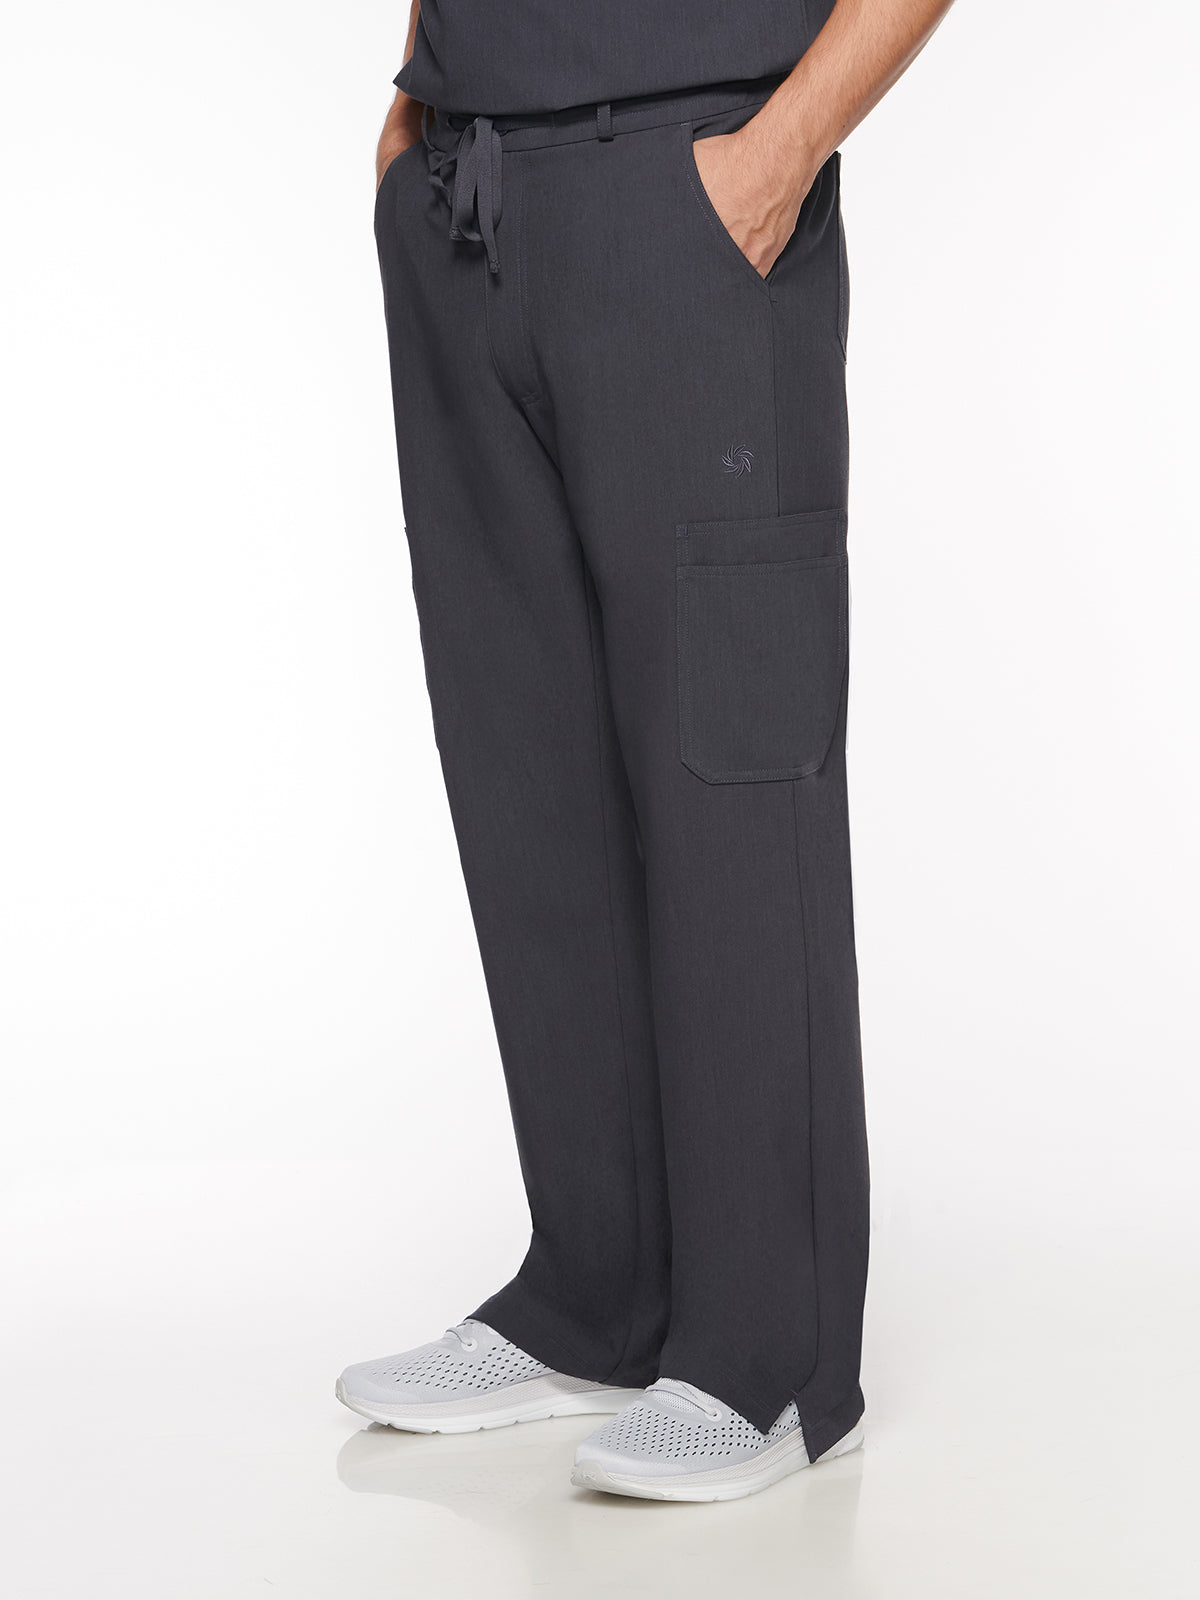 Java Mens Pant French-Fly Pant with 9 Pockets (96001)